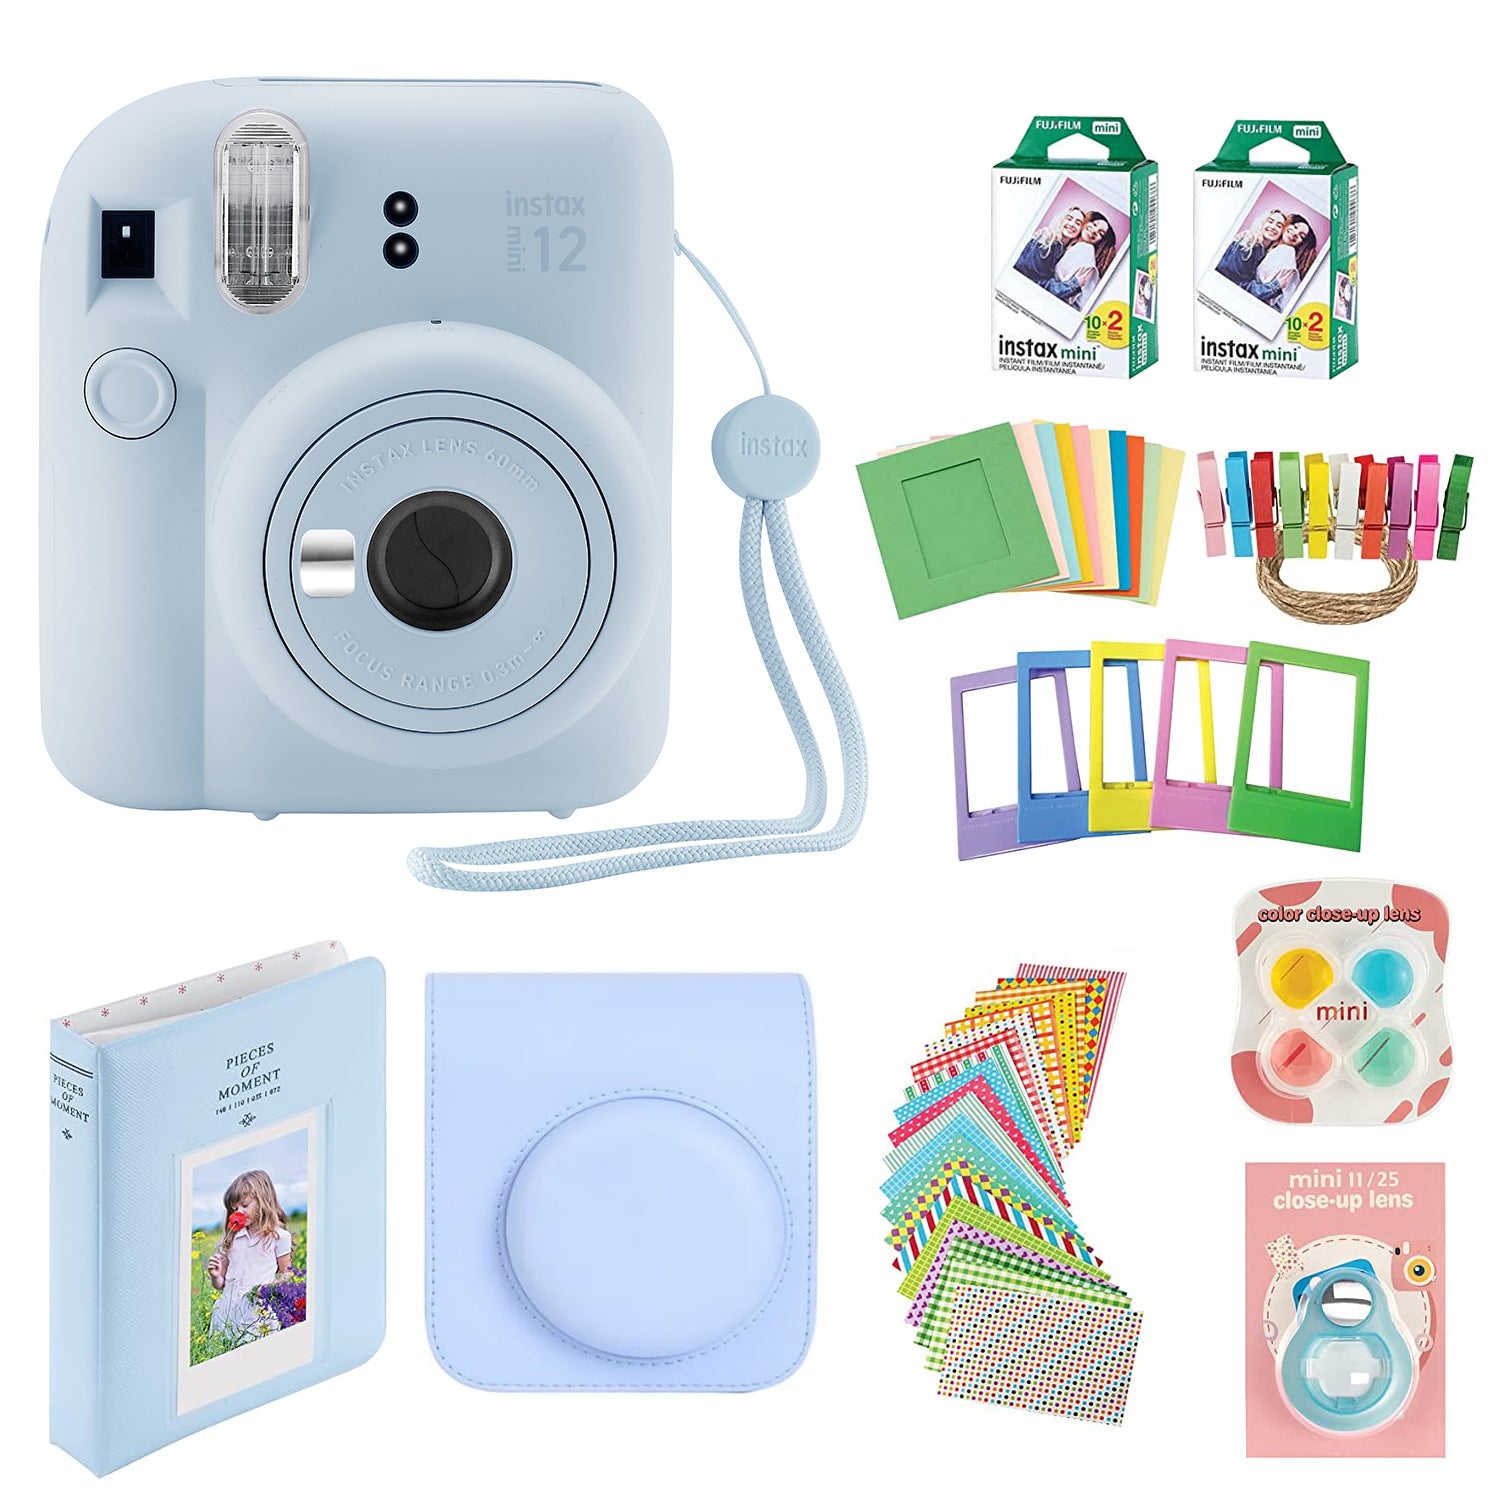 Fujifilm Instax Mini 12 Instant Camera with Case, 40 Fuji Films, Decoration Stickers, Frames, Photo Album and More Accessory kit (Pastel Blue)